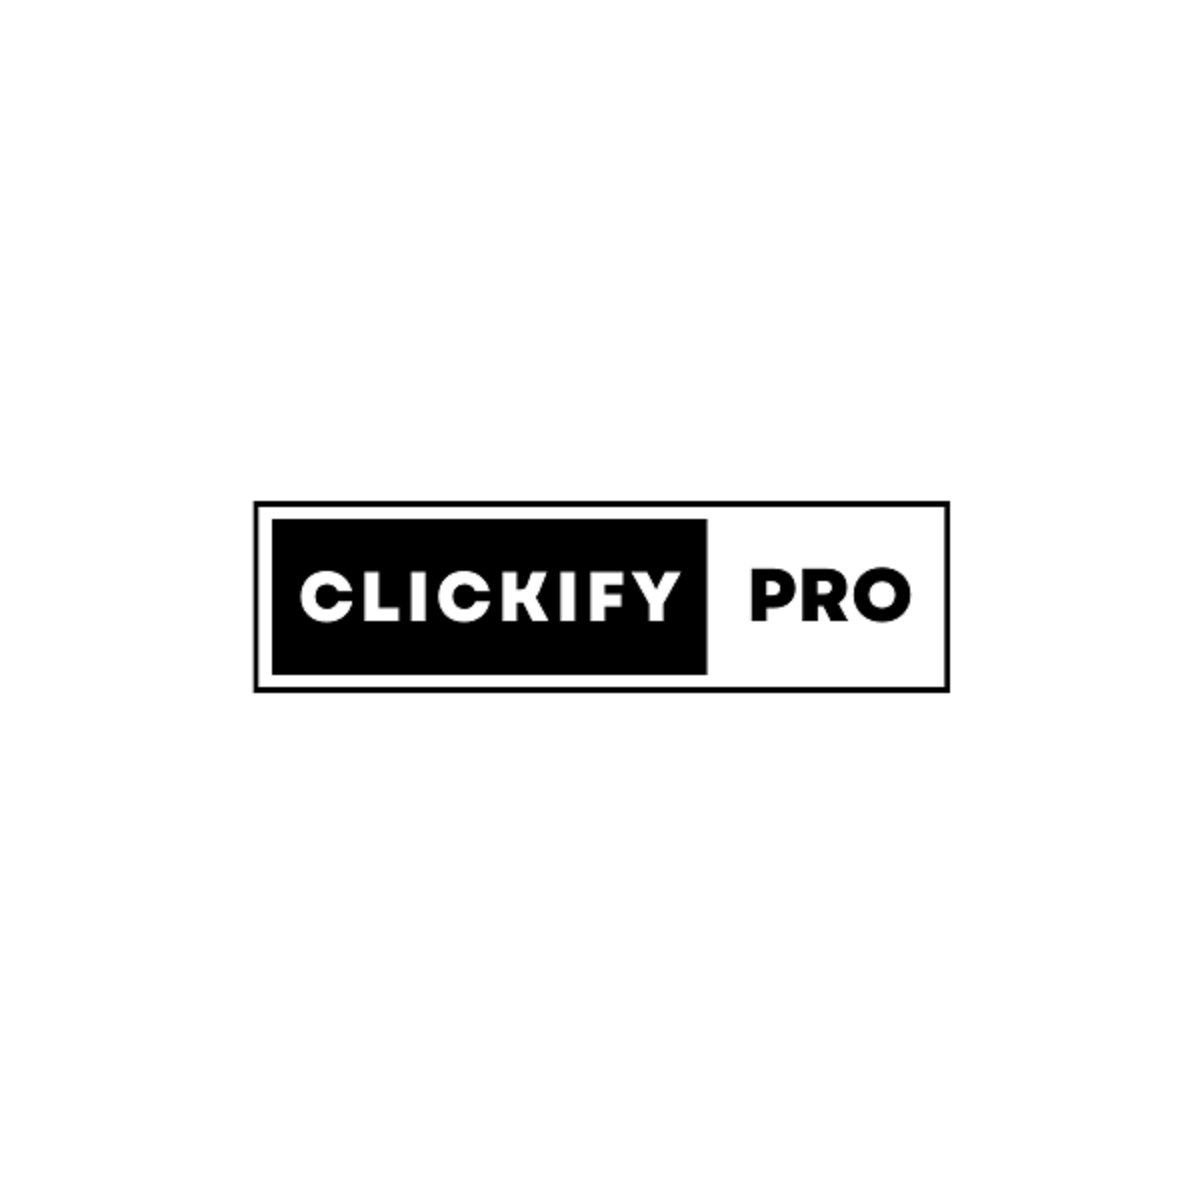 ClickifyPro Shopify App